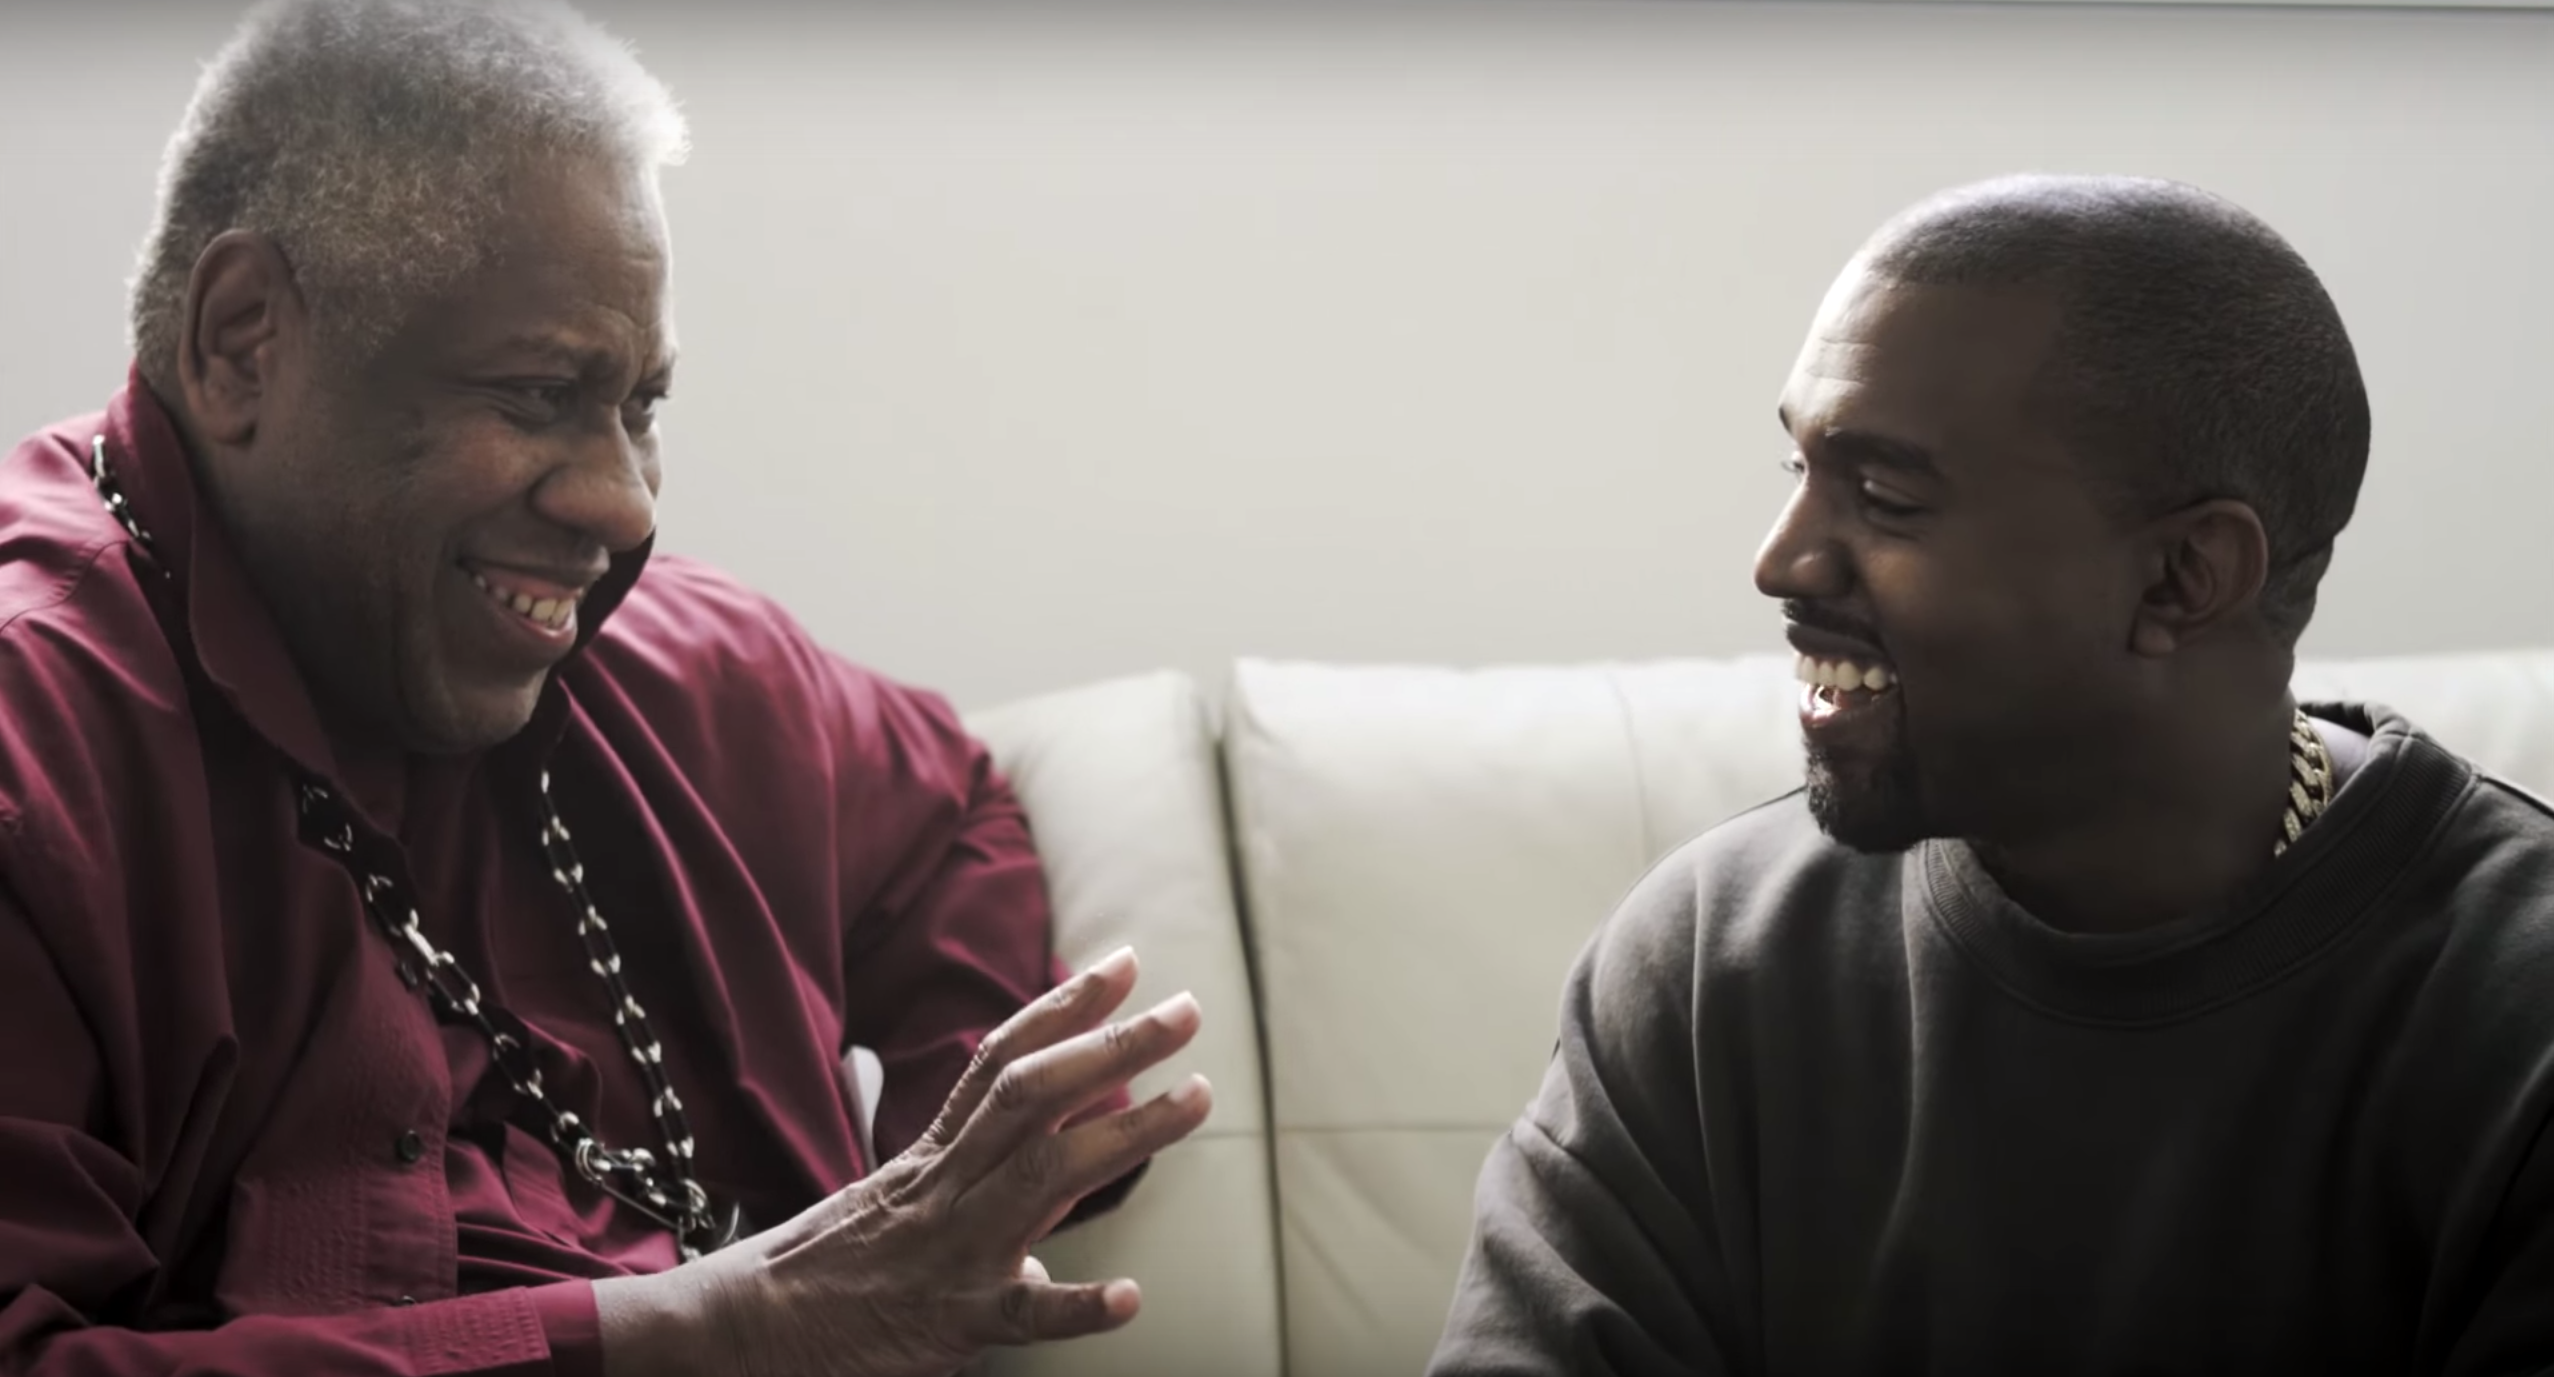 NYFW: Andre Leon Talley & Kanye West Open up About Yeezy